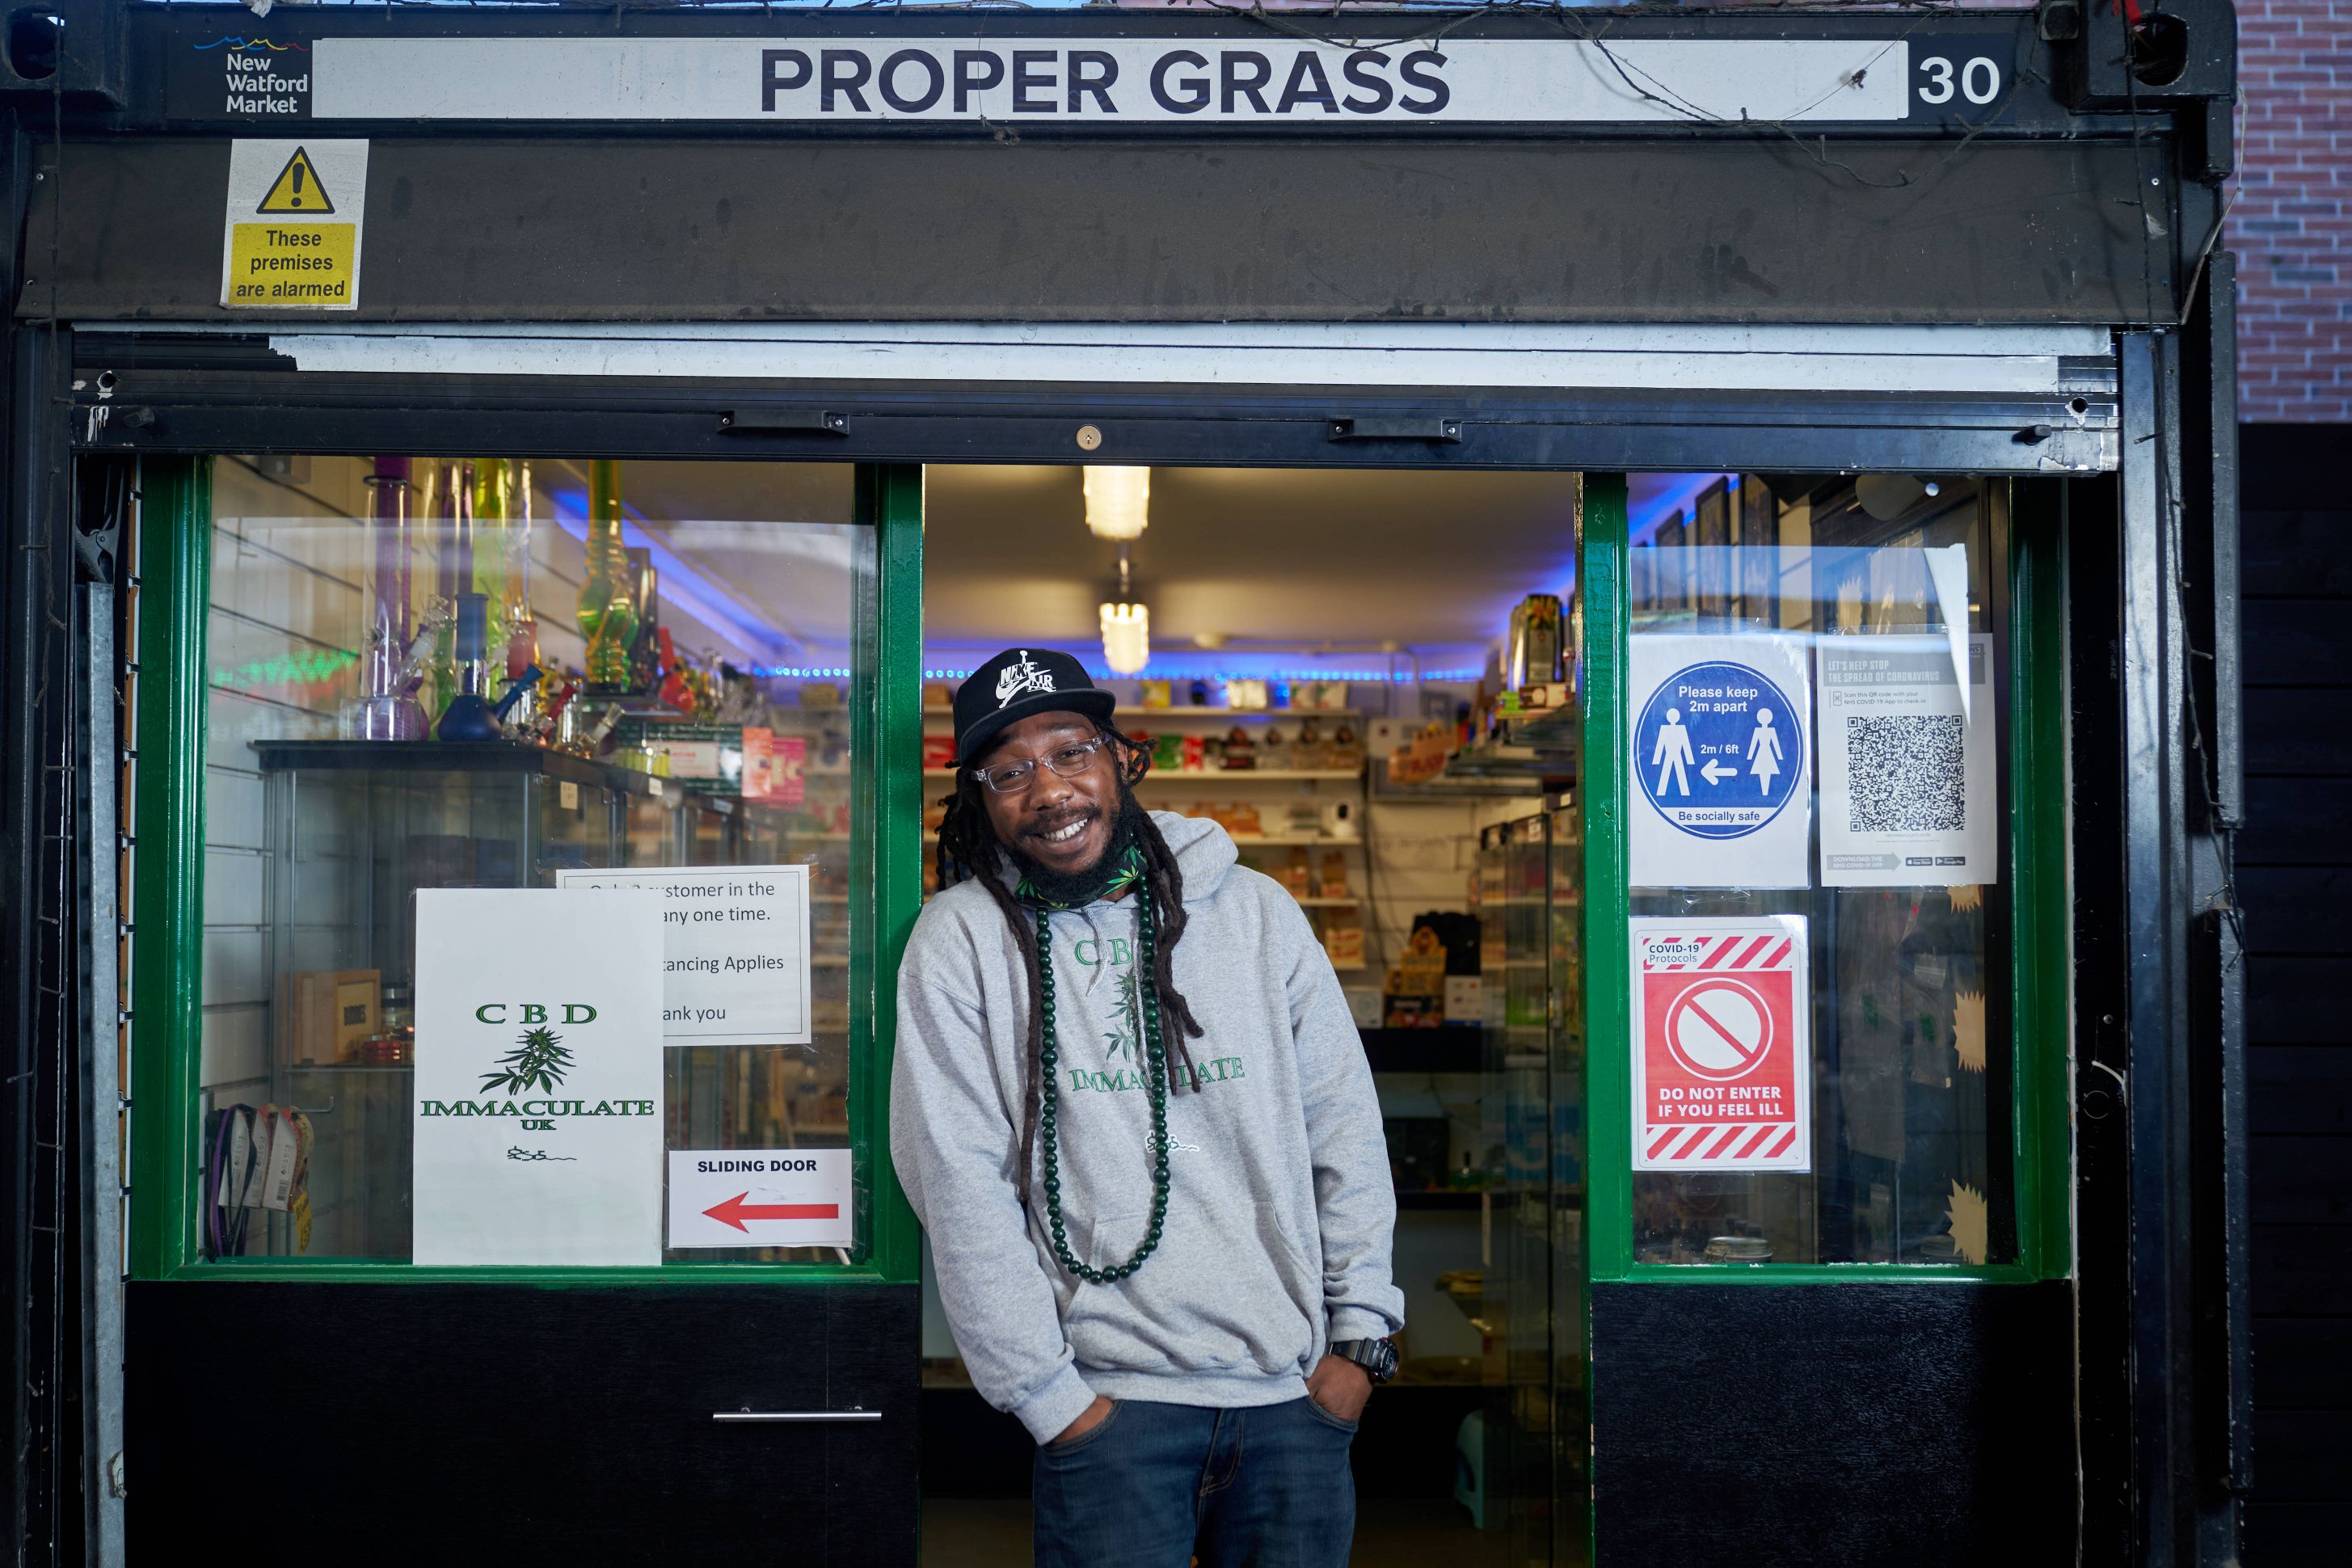 Proper Grass will be at Market Lates